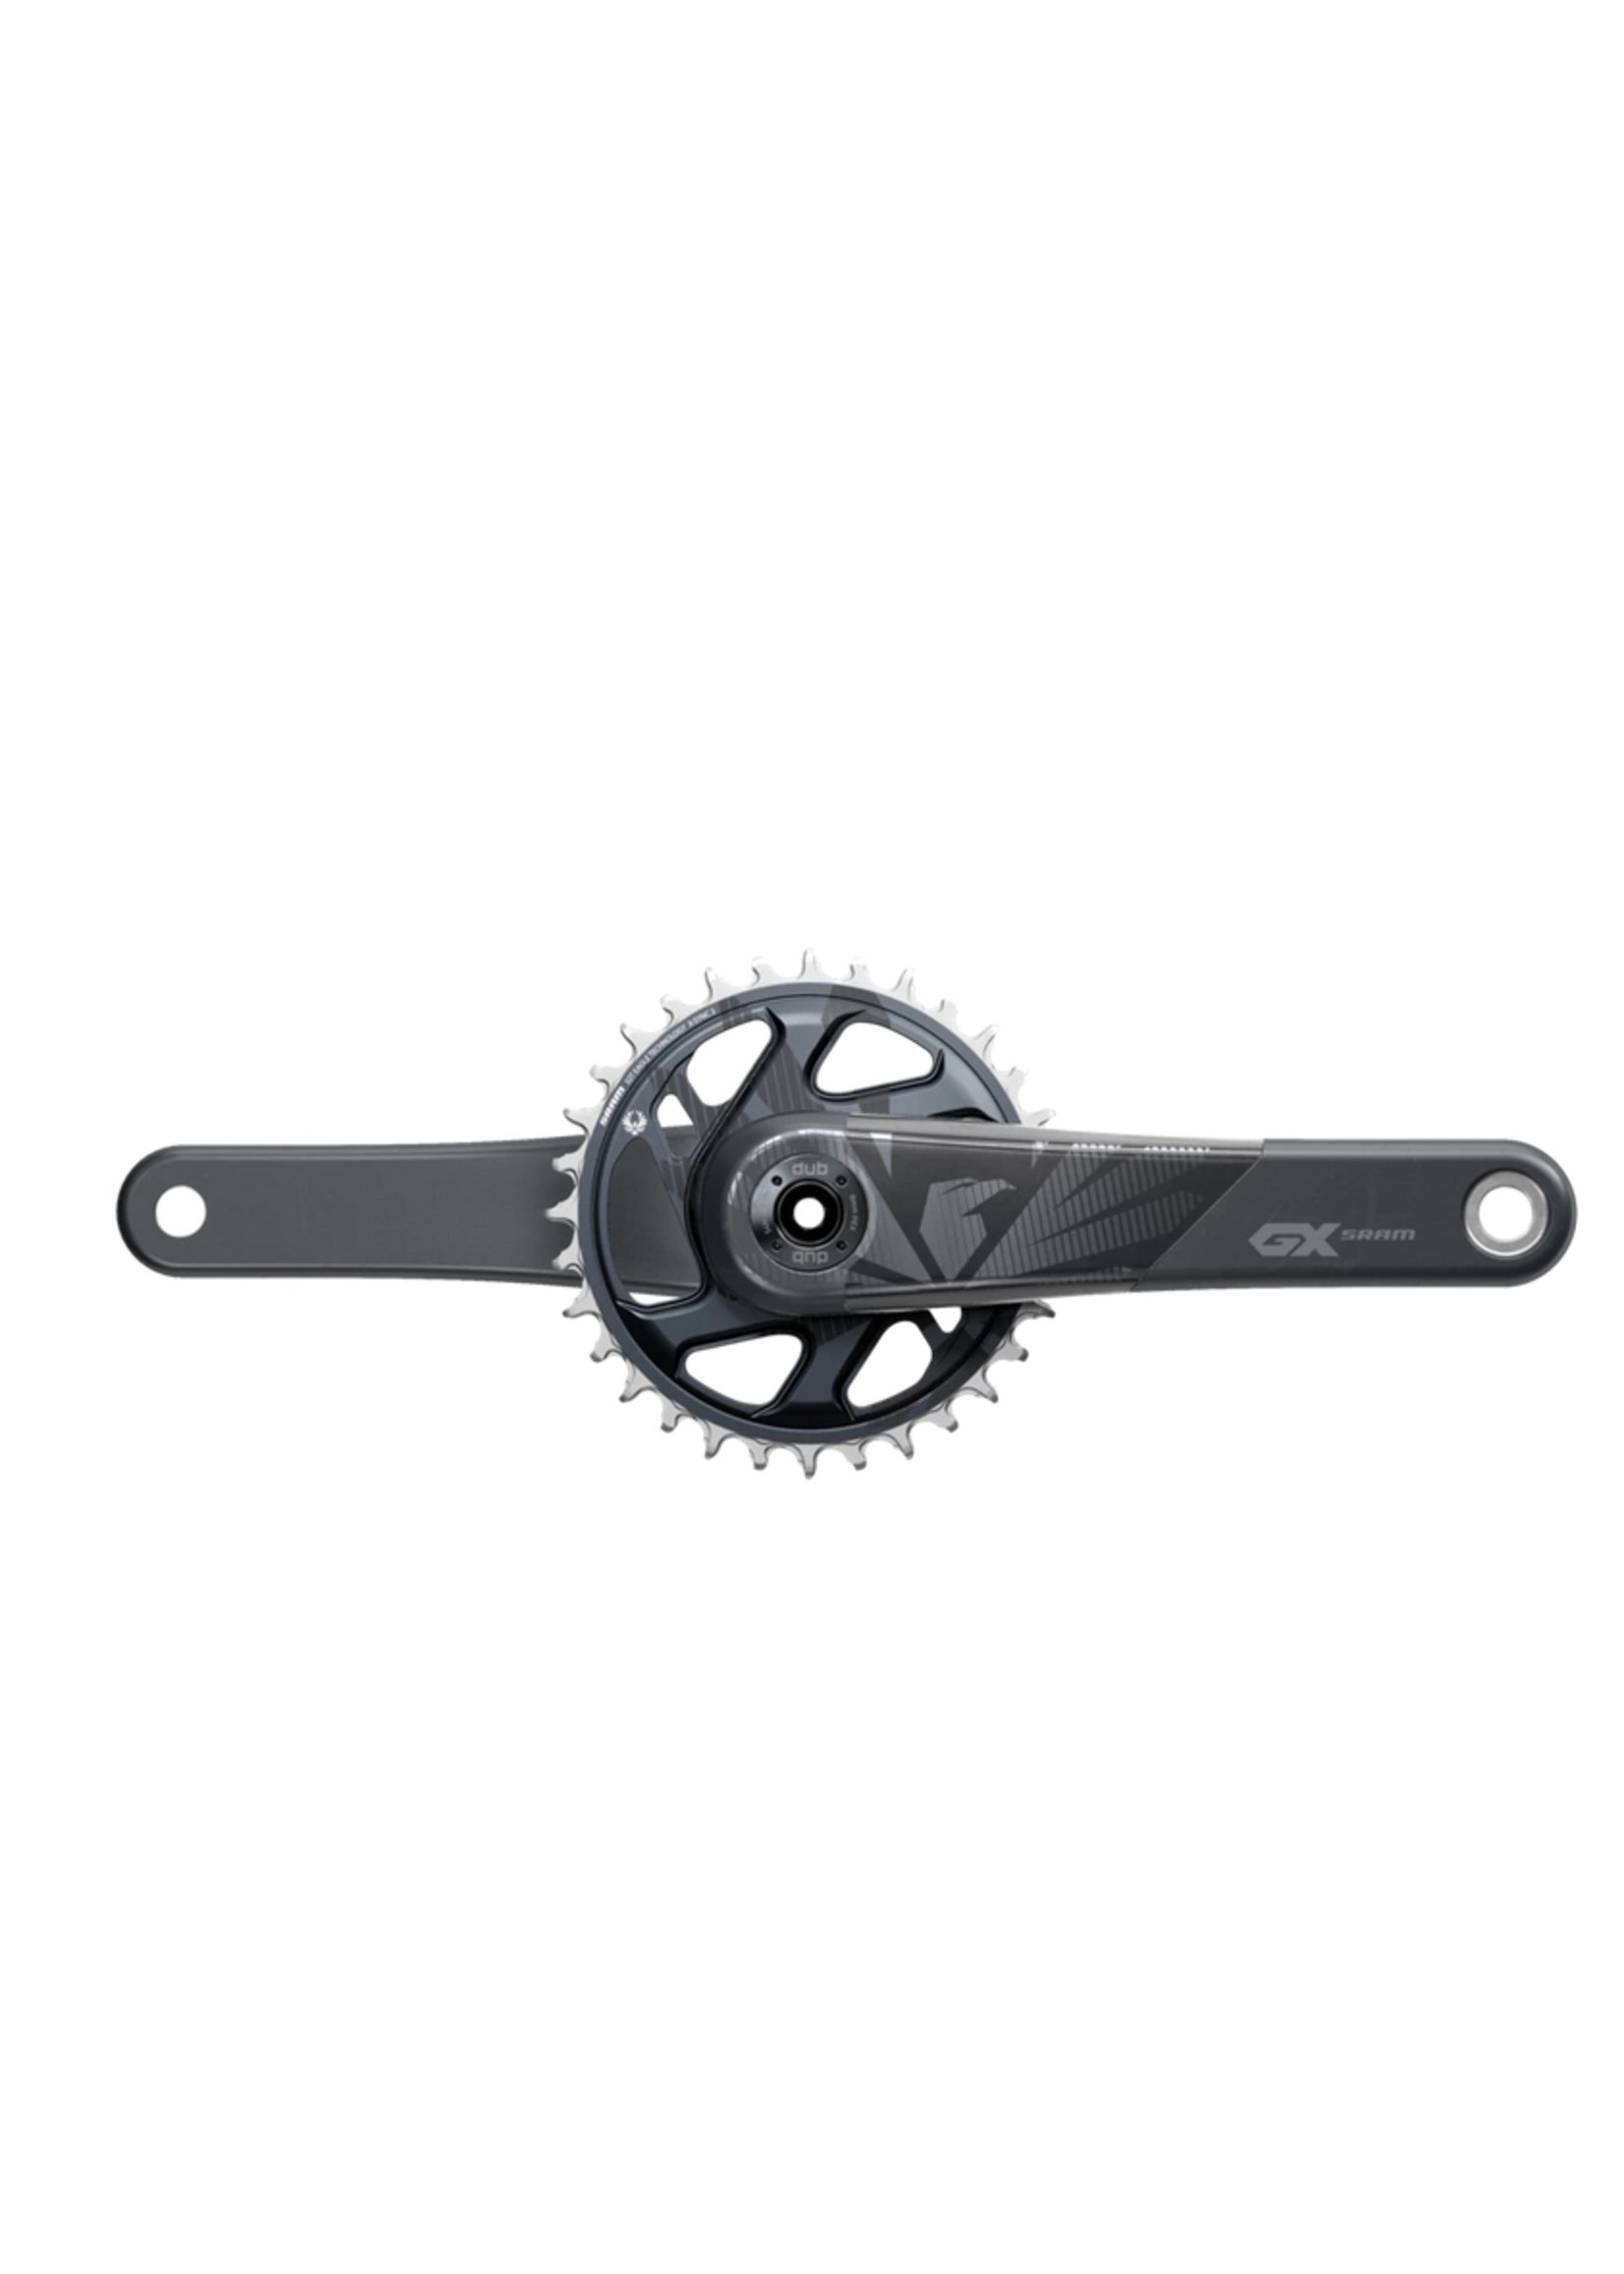 Shimano SRAM Crank GX Carbon Eagle Boost 148 DUB 12s 170 w Direct Mount 32t X-SYNC 2 Chainring Lunar (DUB Cups/Bearings Not Included)